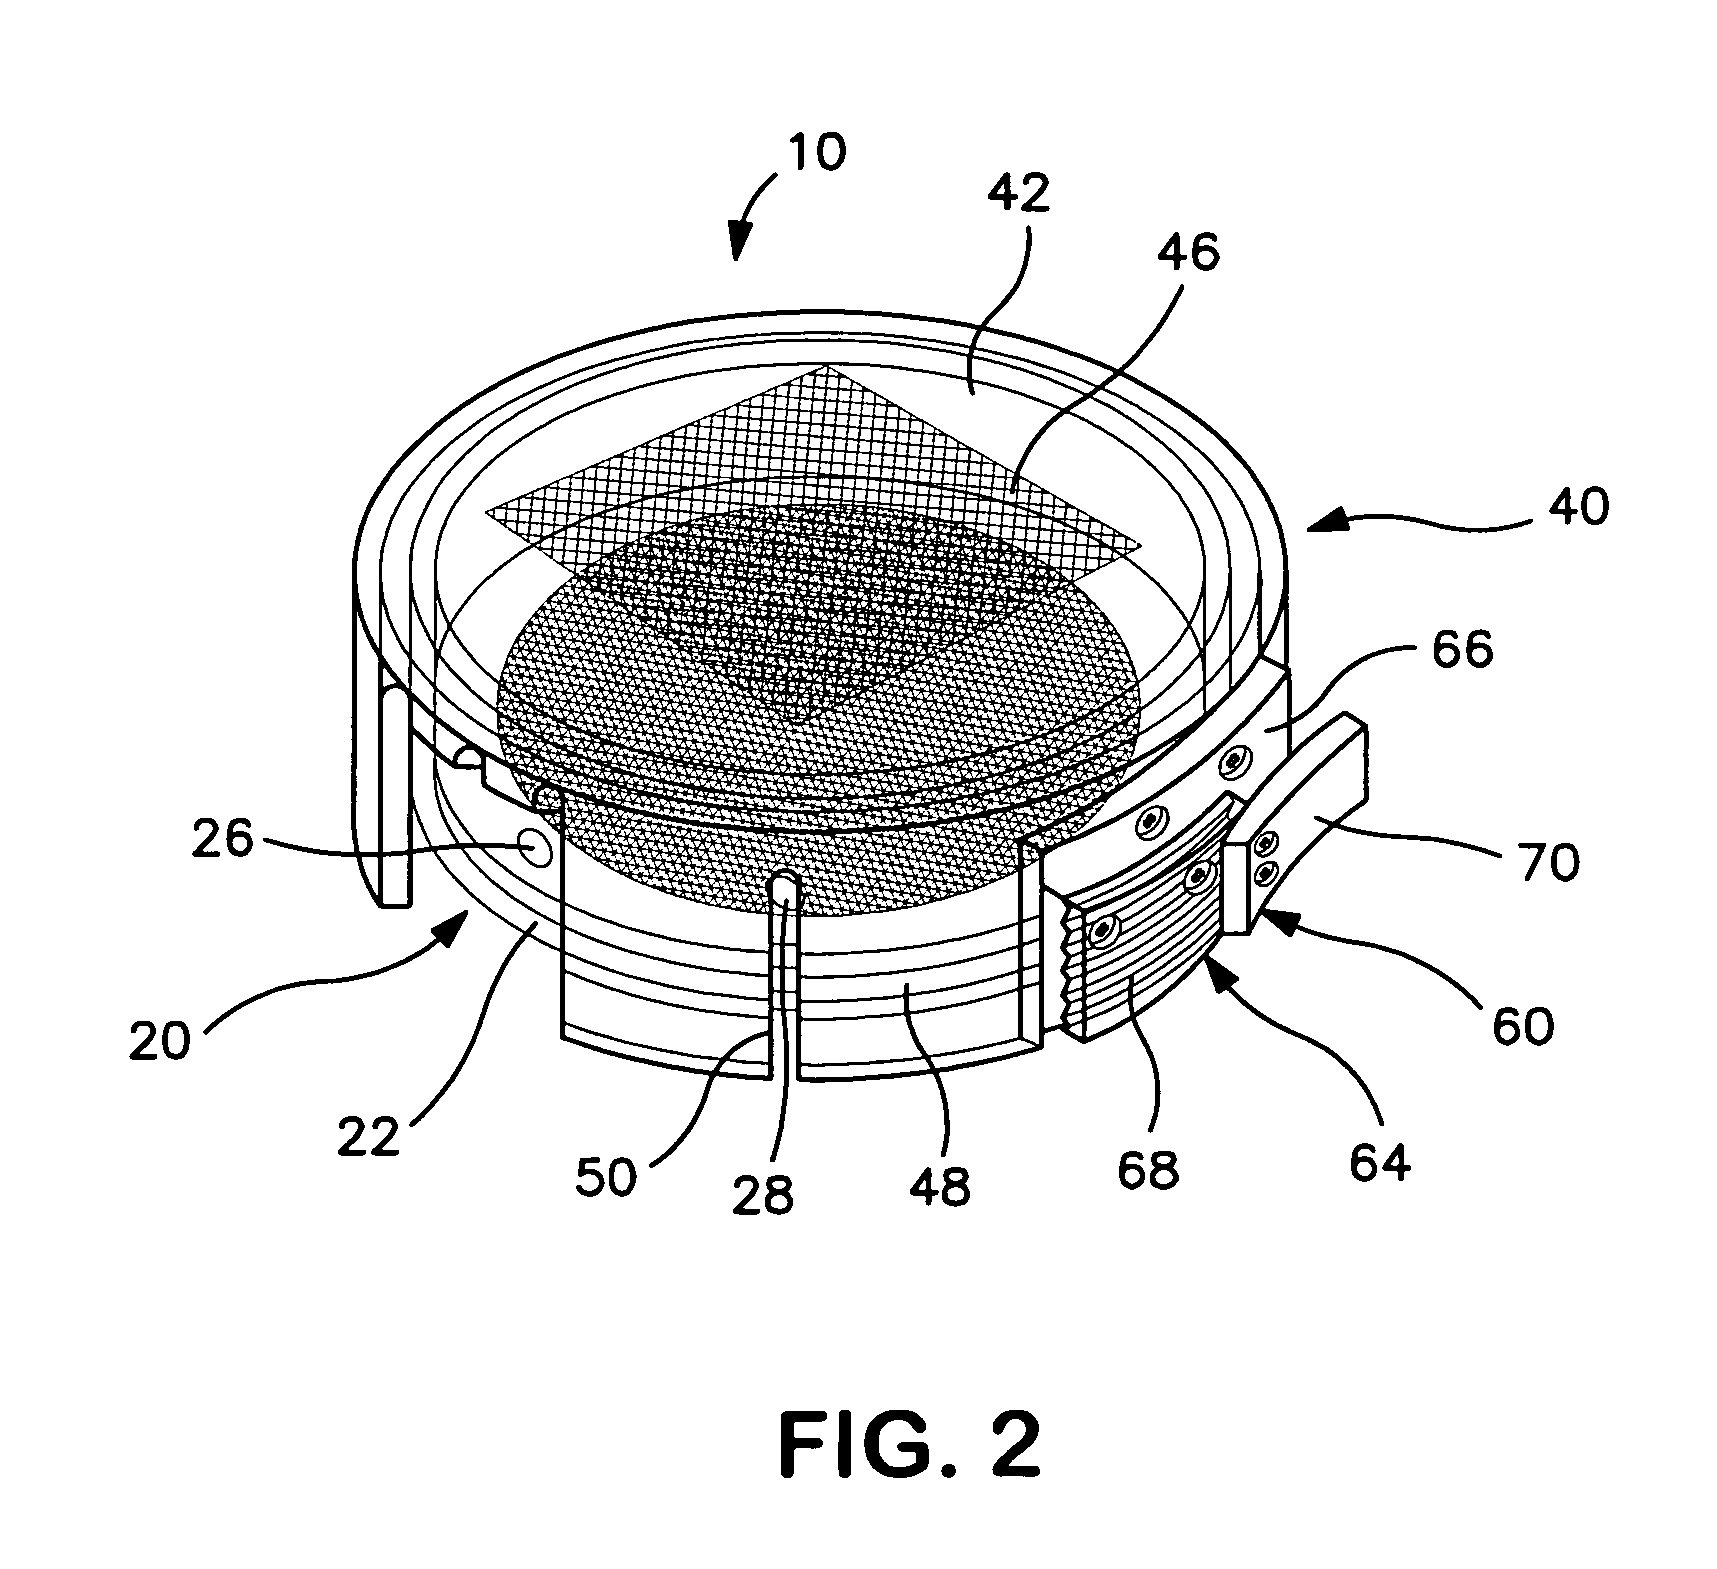 Device for containing and analyzing surgically excised tissue and related methods